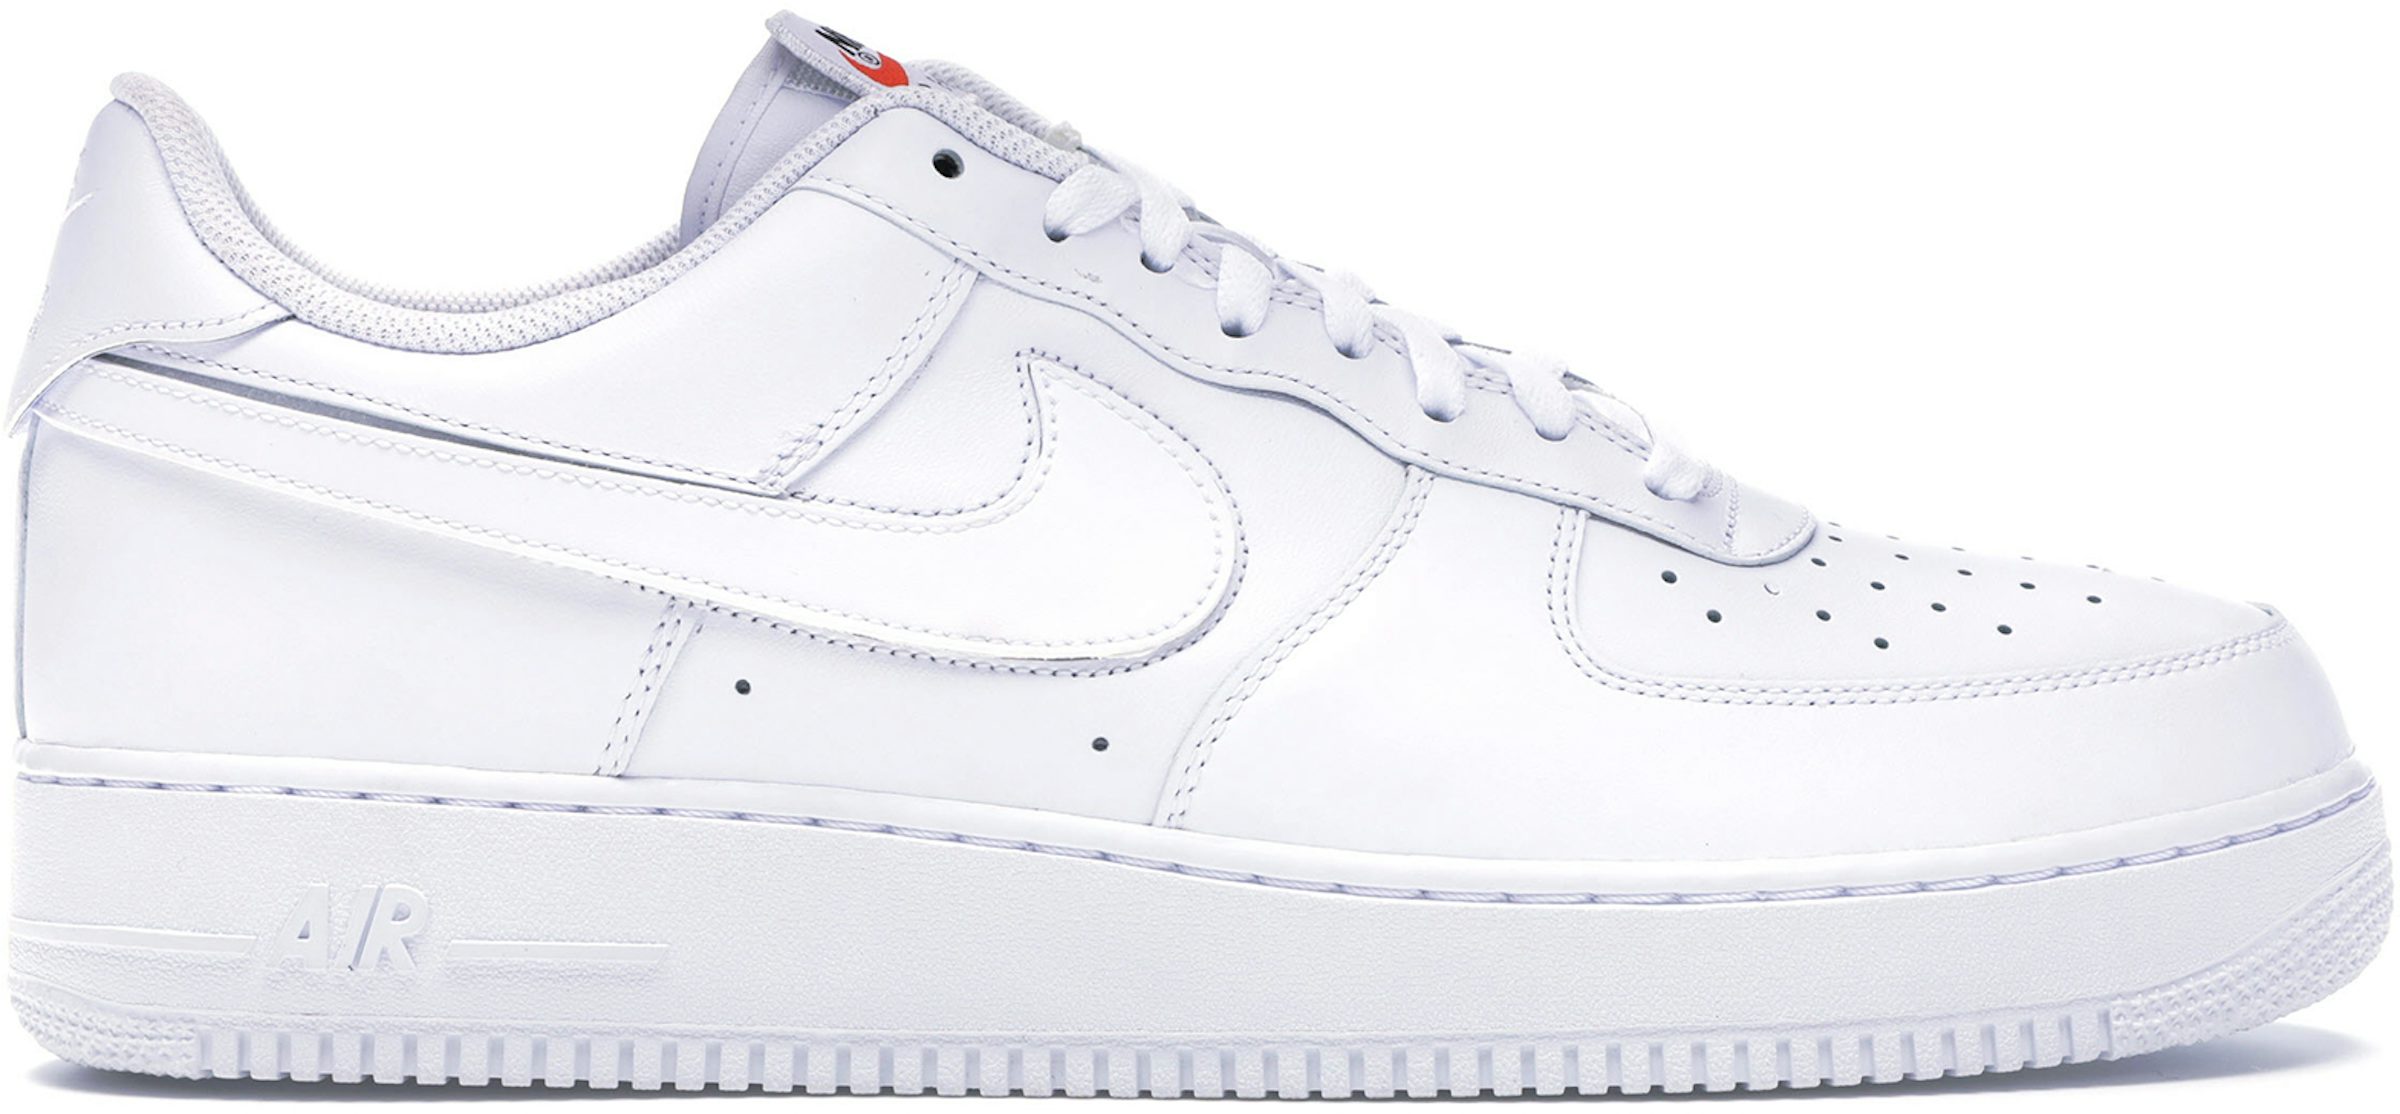 Air Force 1 Louis Vuitton: Everything You Need To Know - StockX News